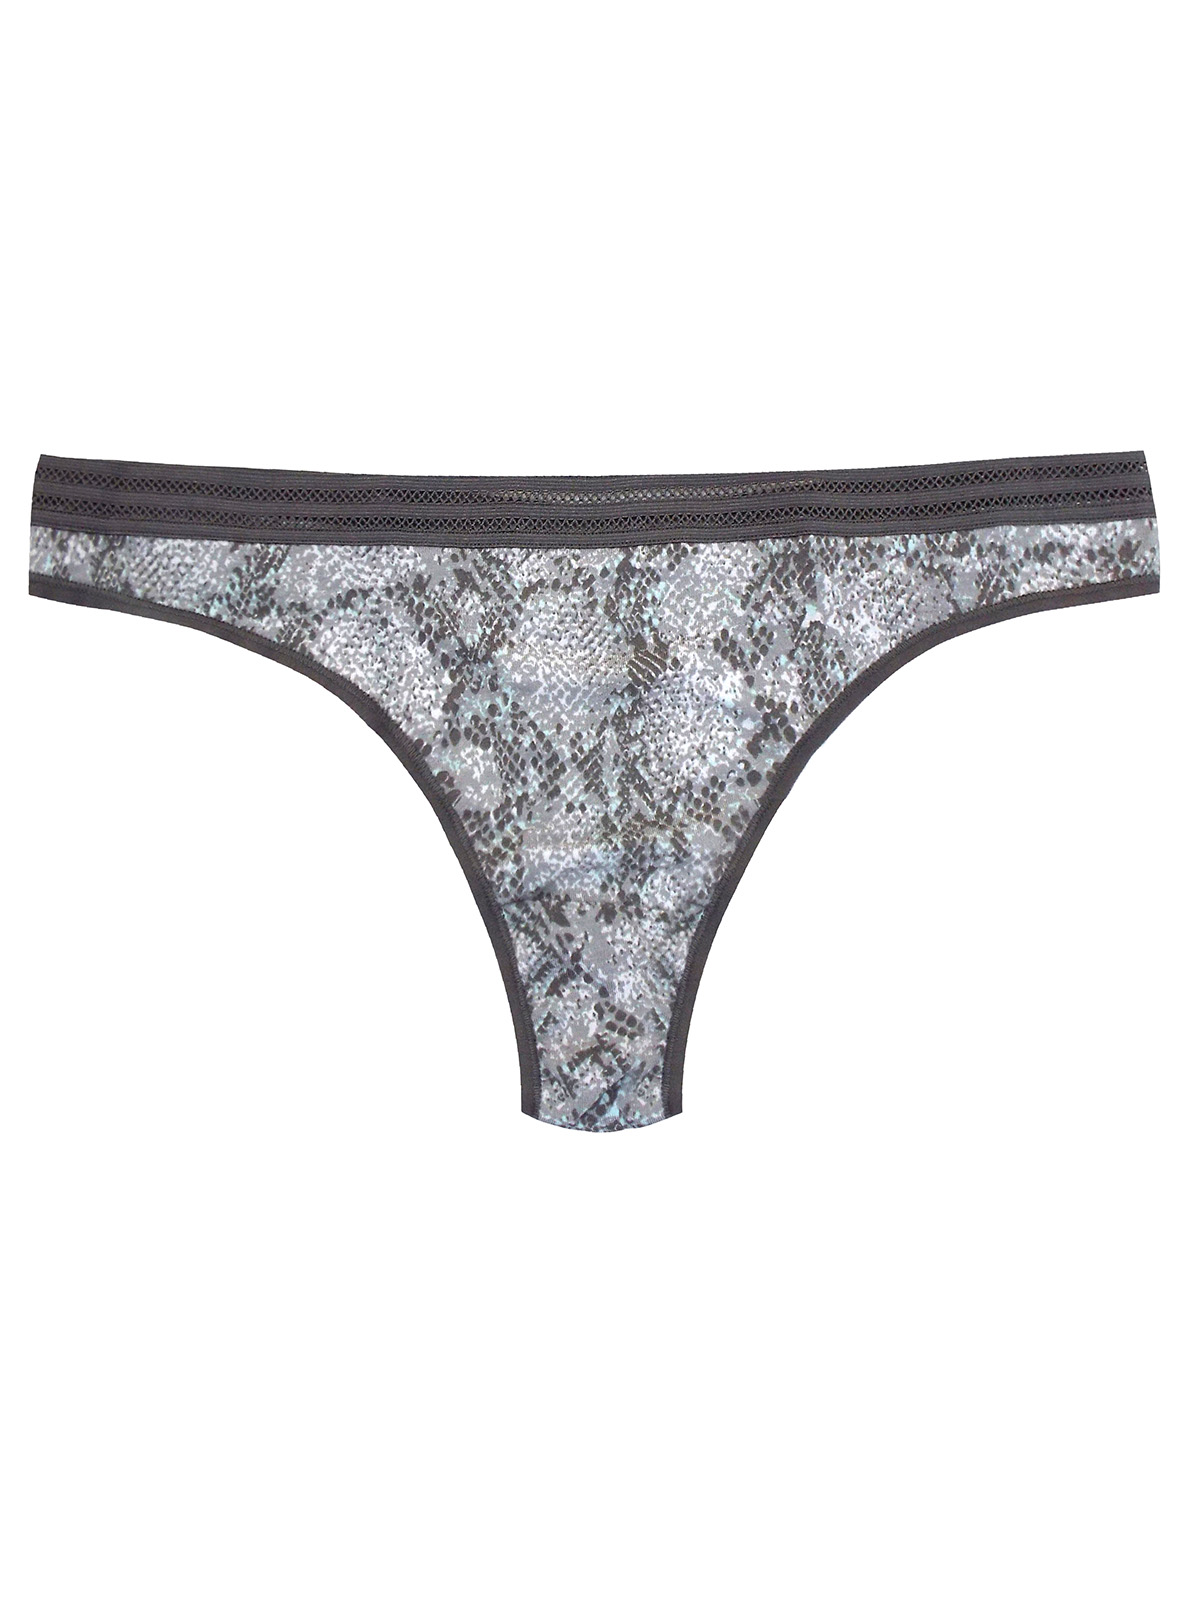 Marks and Spencer - - M&5 GREY No VPL Modal Snake Print Thong - Size 6 ...